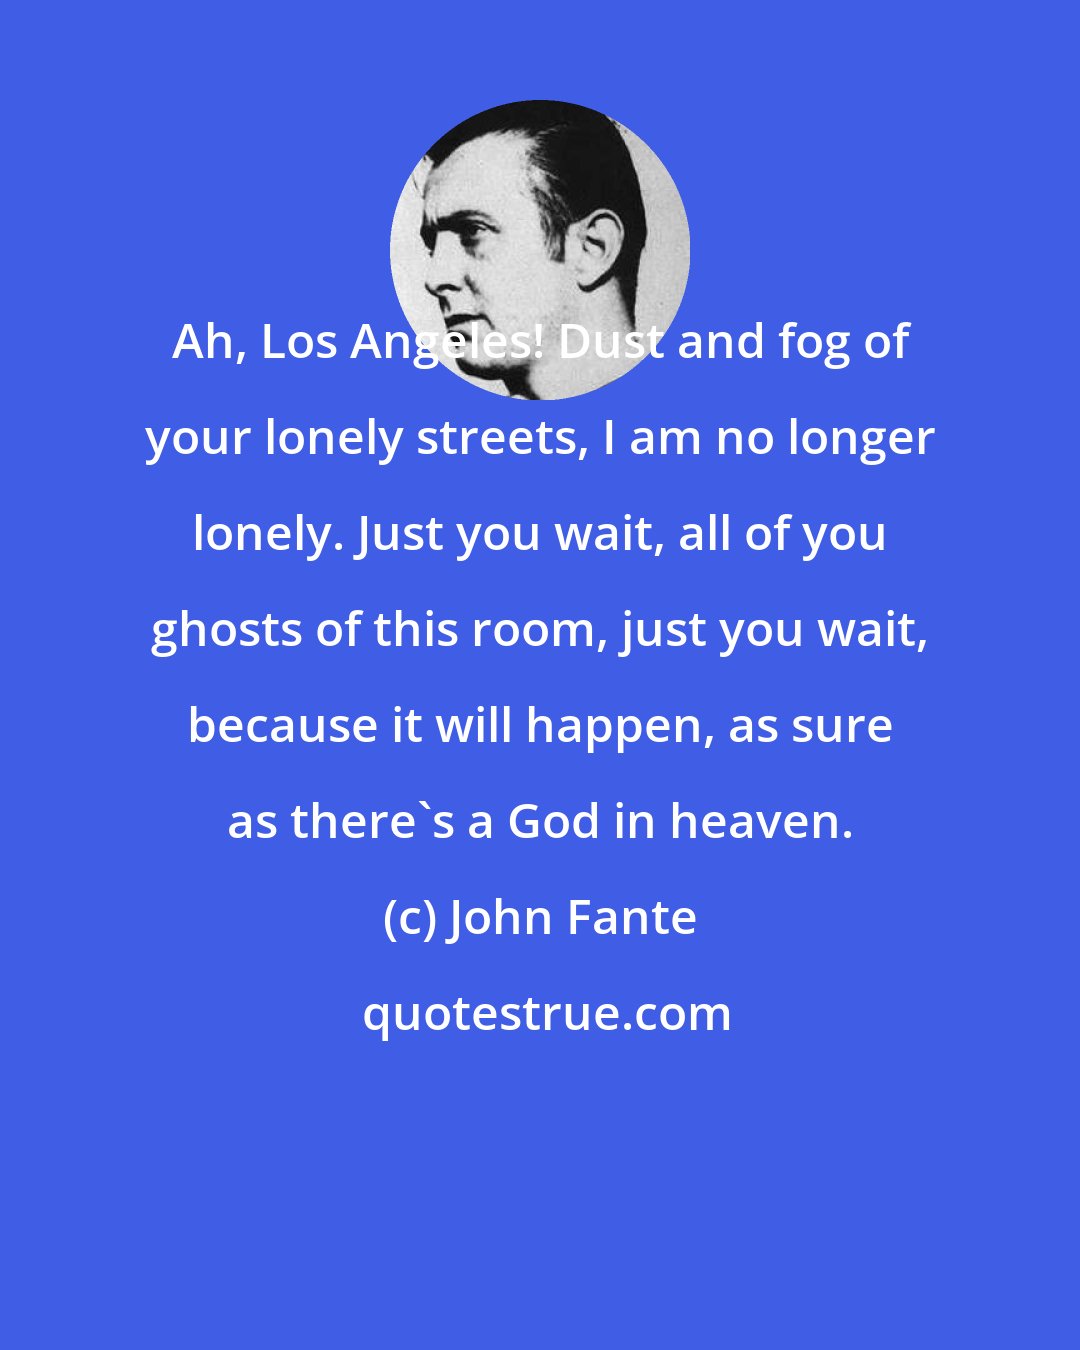 John Fante: Ah, Los Angeles! Dust and fog of your lonely streets, I am no longer lonely. Just you wait, all of you ghosts of this room, just you wait, because it will happen, as sure as there's a God in heaven.